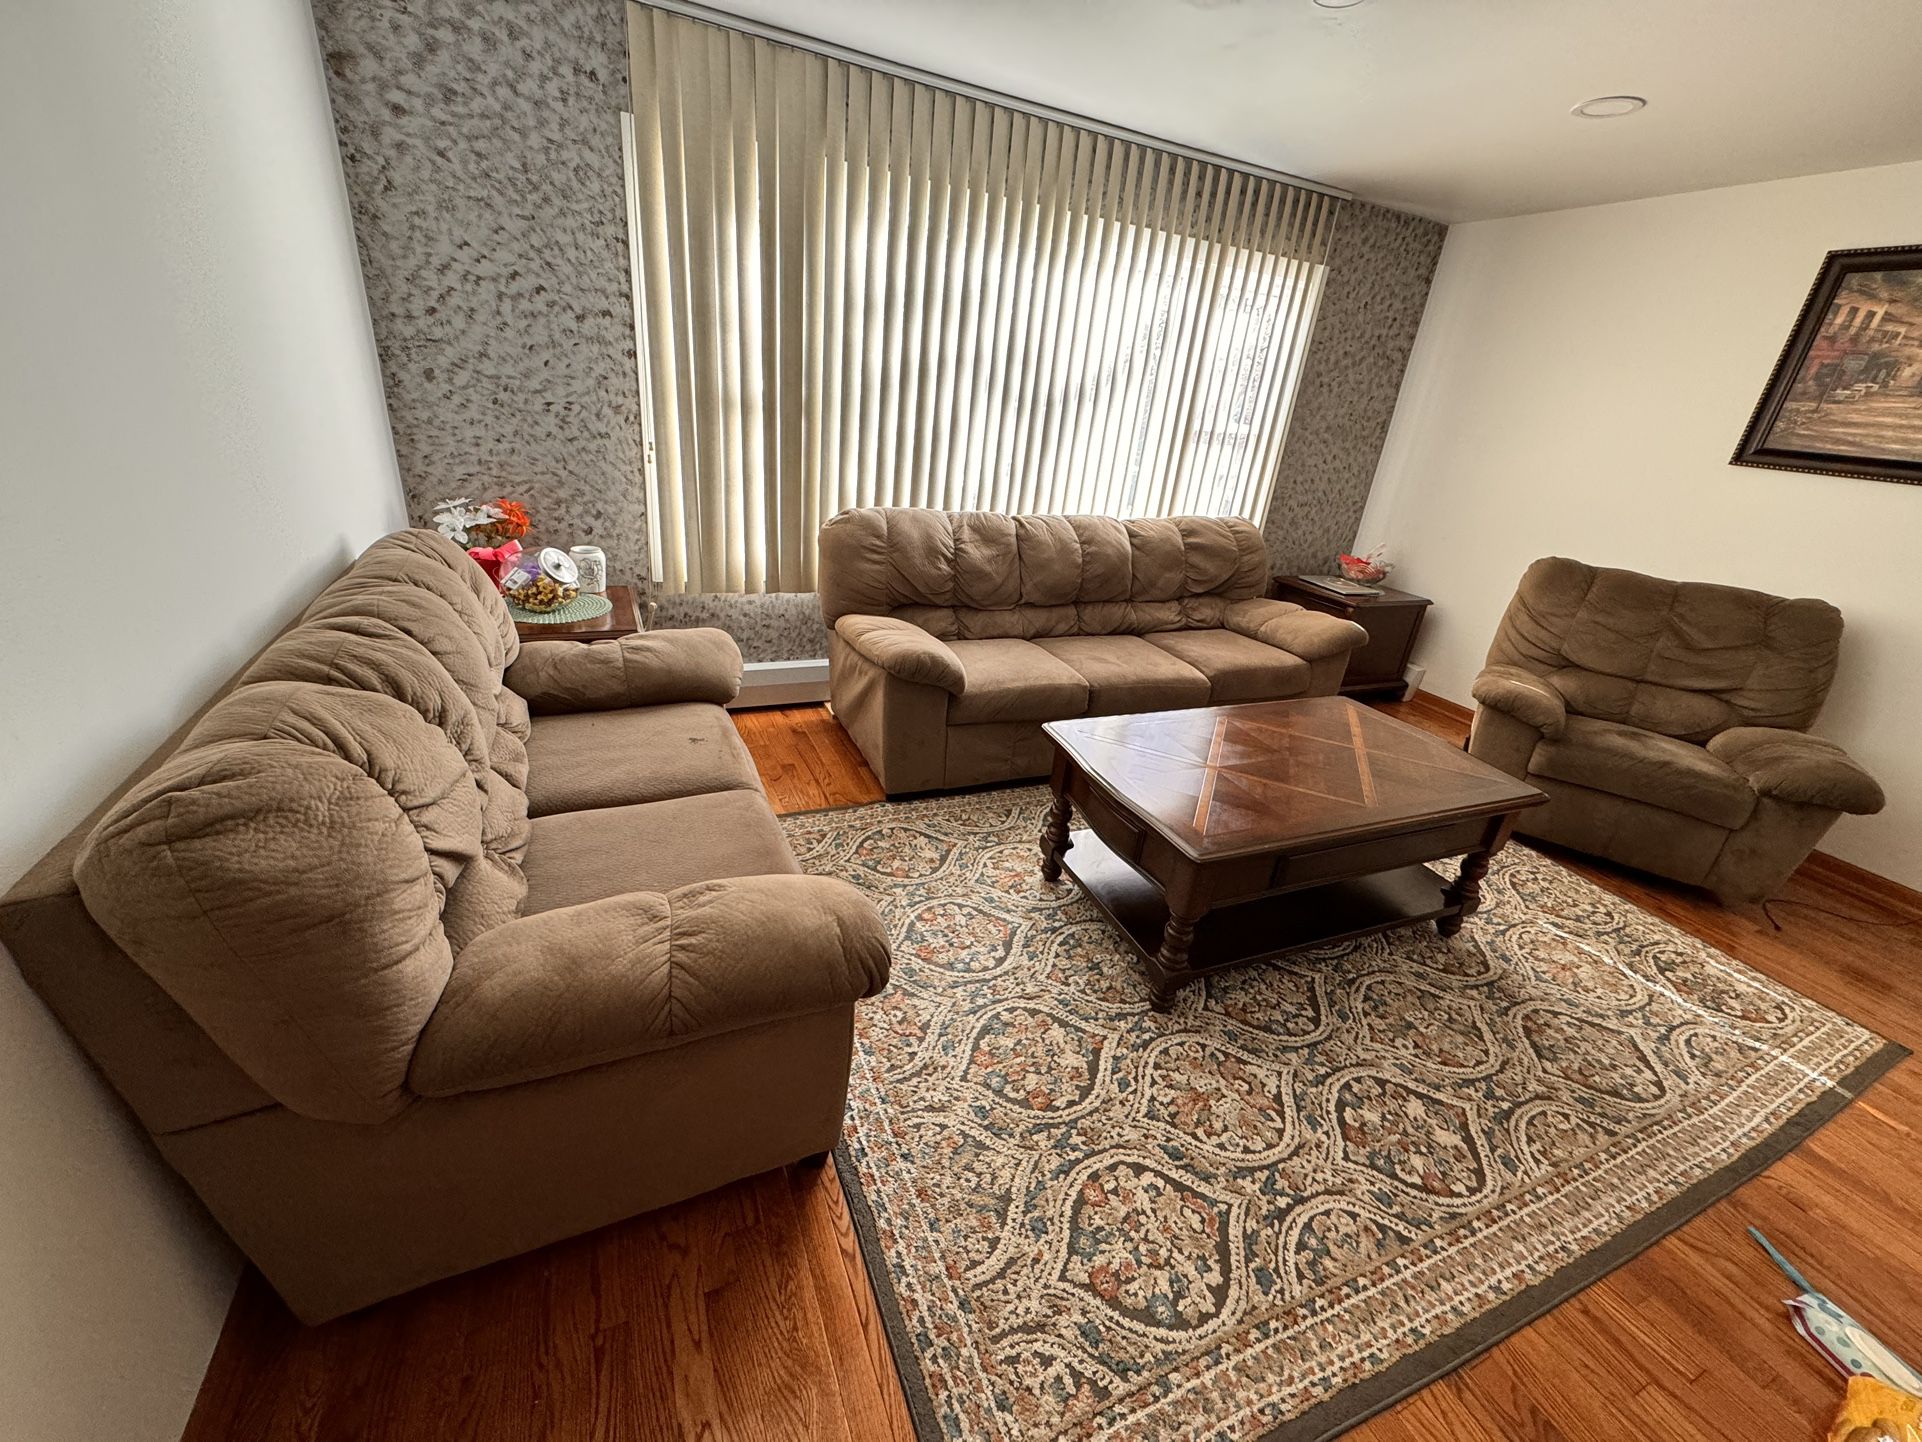 4 Piece Living Room Set Or Individual Items For Sale